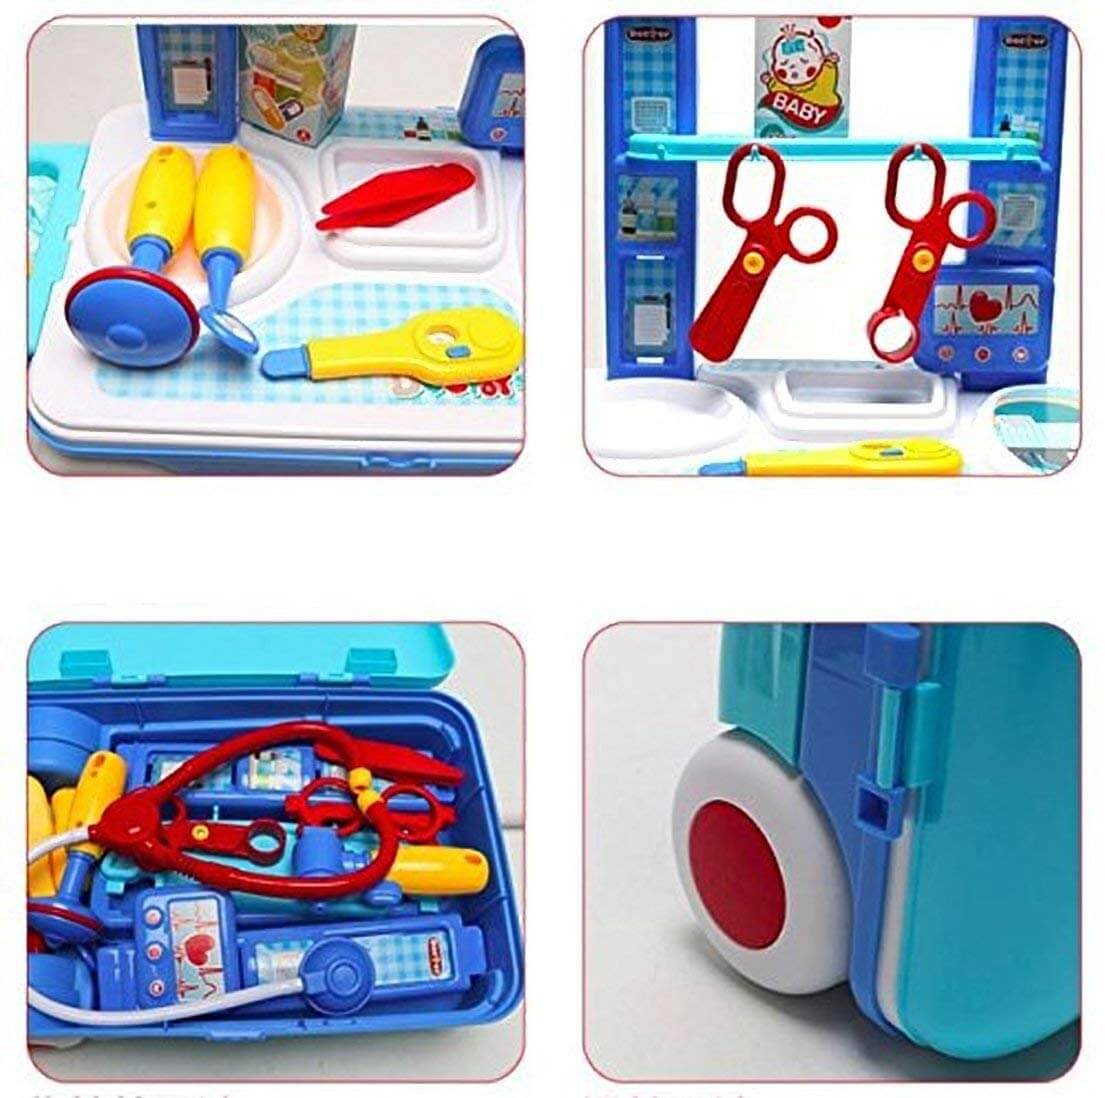 Portable Kids Doctor Nurse Medical Role Play Set Case Baby Kit Educational Toy E 